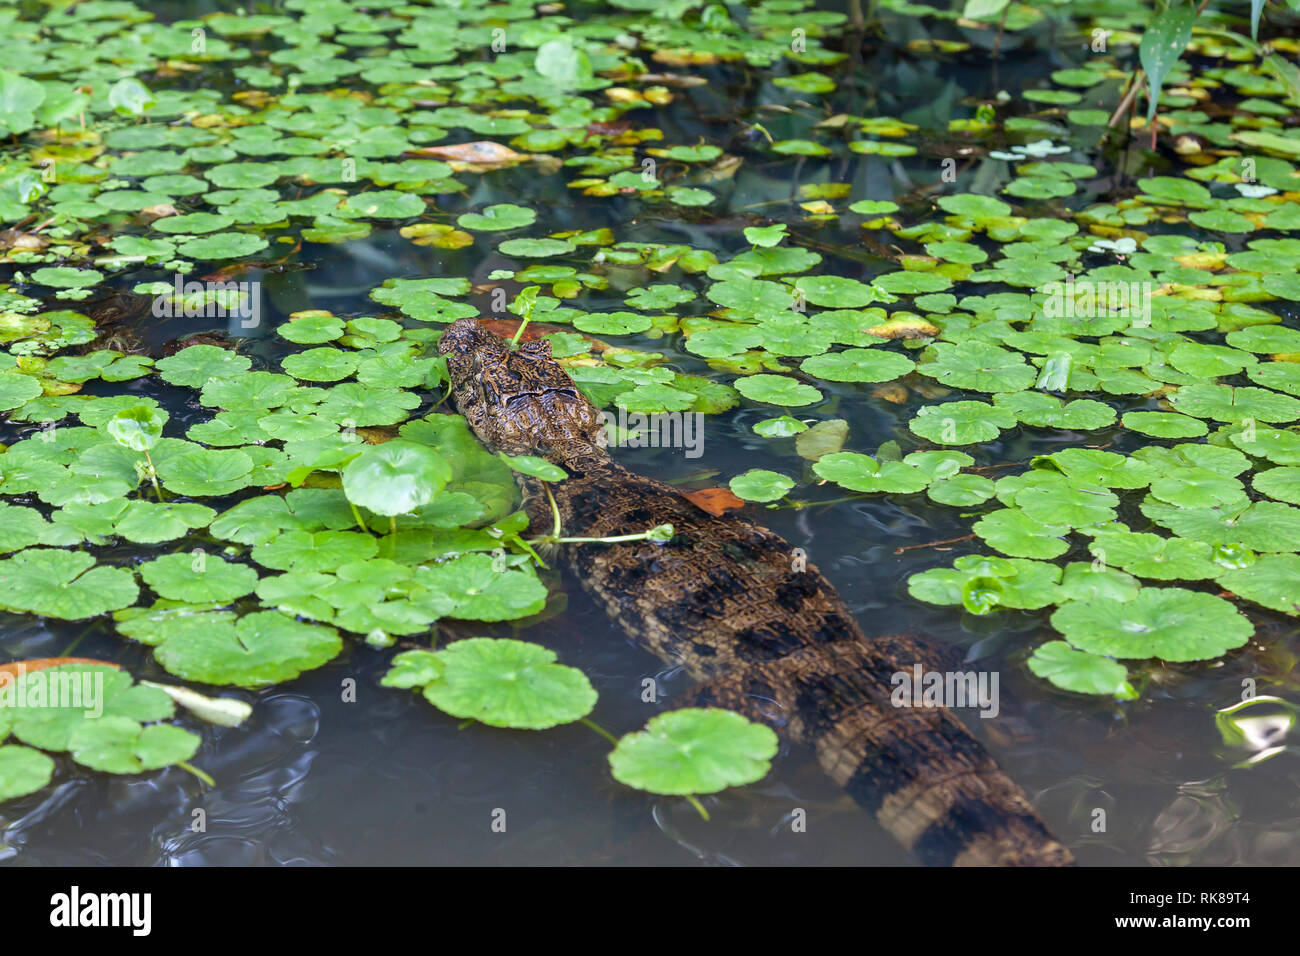 A Caiman in the river with green leaves at Tortuguero National Park in Costa Rica, a smaller kin of the crocodiles. Stock Photo